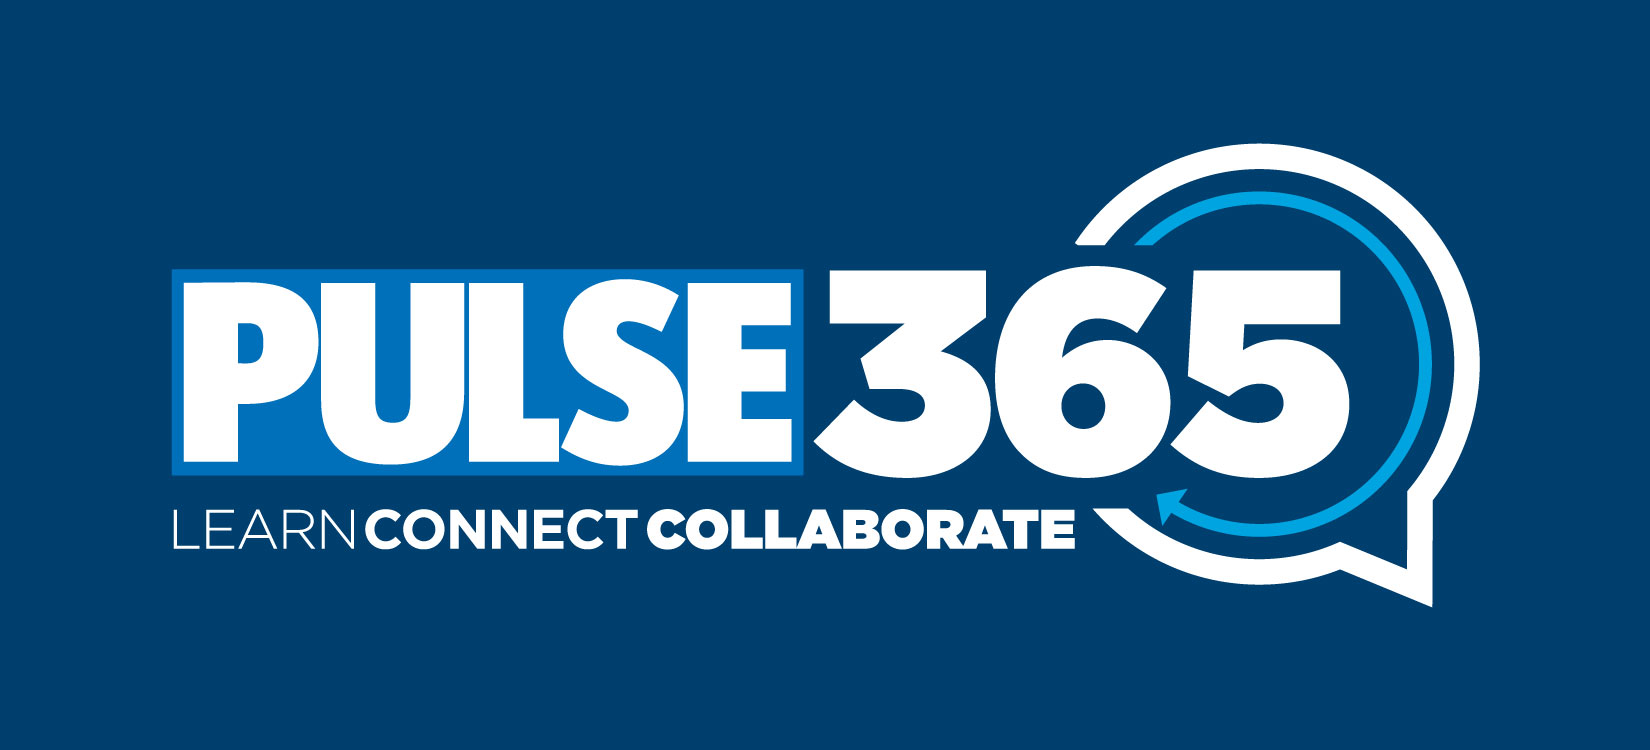 PULSE 365 launches